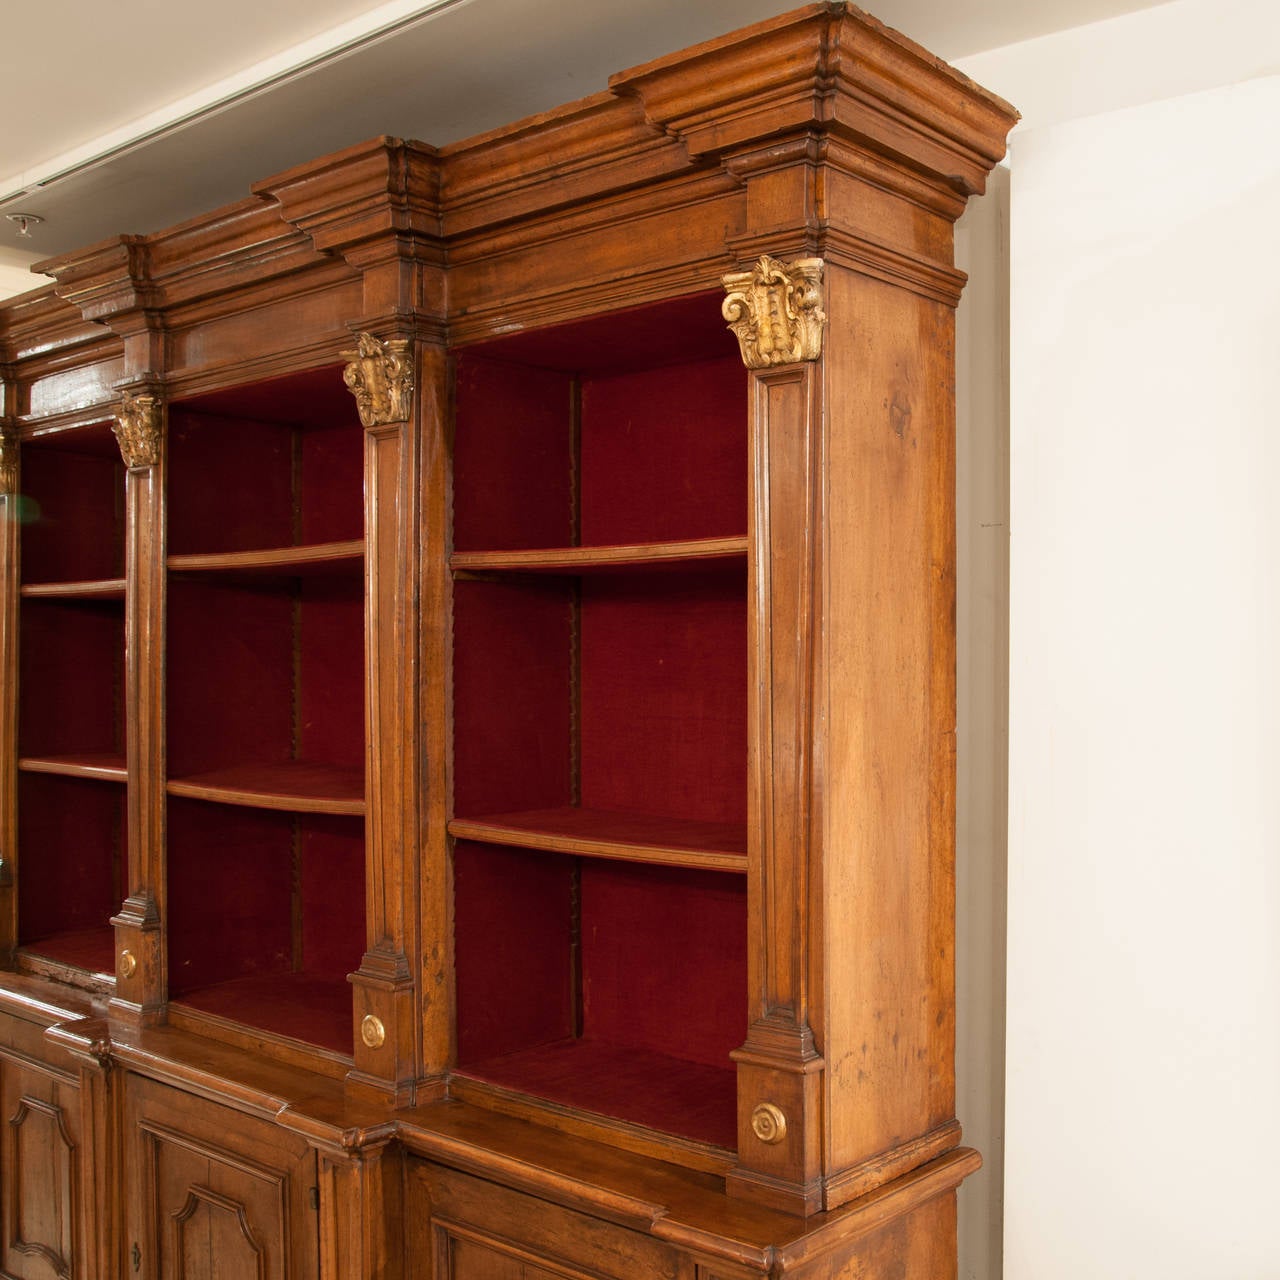 Italian Walnut Breakfront Bookcase C1860 The Deeply Moulded Cornice Above Columns With Gilded Capitols And Roundels Above Three Paneled Doors On Bracket Feet circa 1850 

Height 2430 
Length 2740 
Depth 530